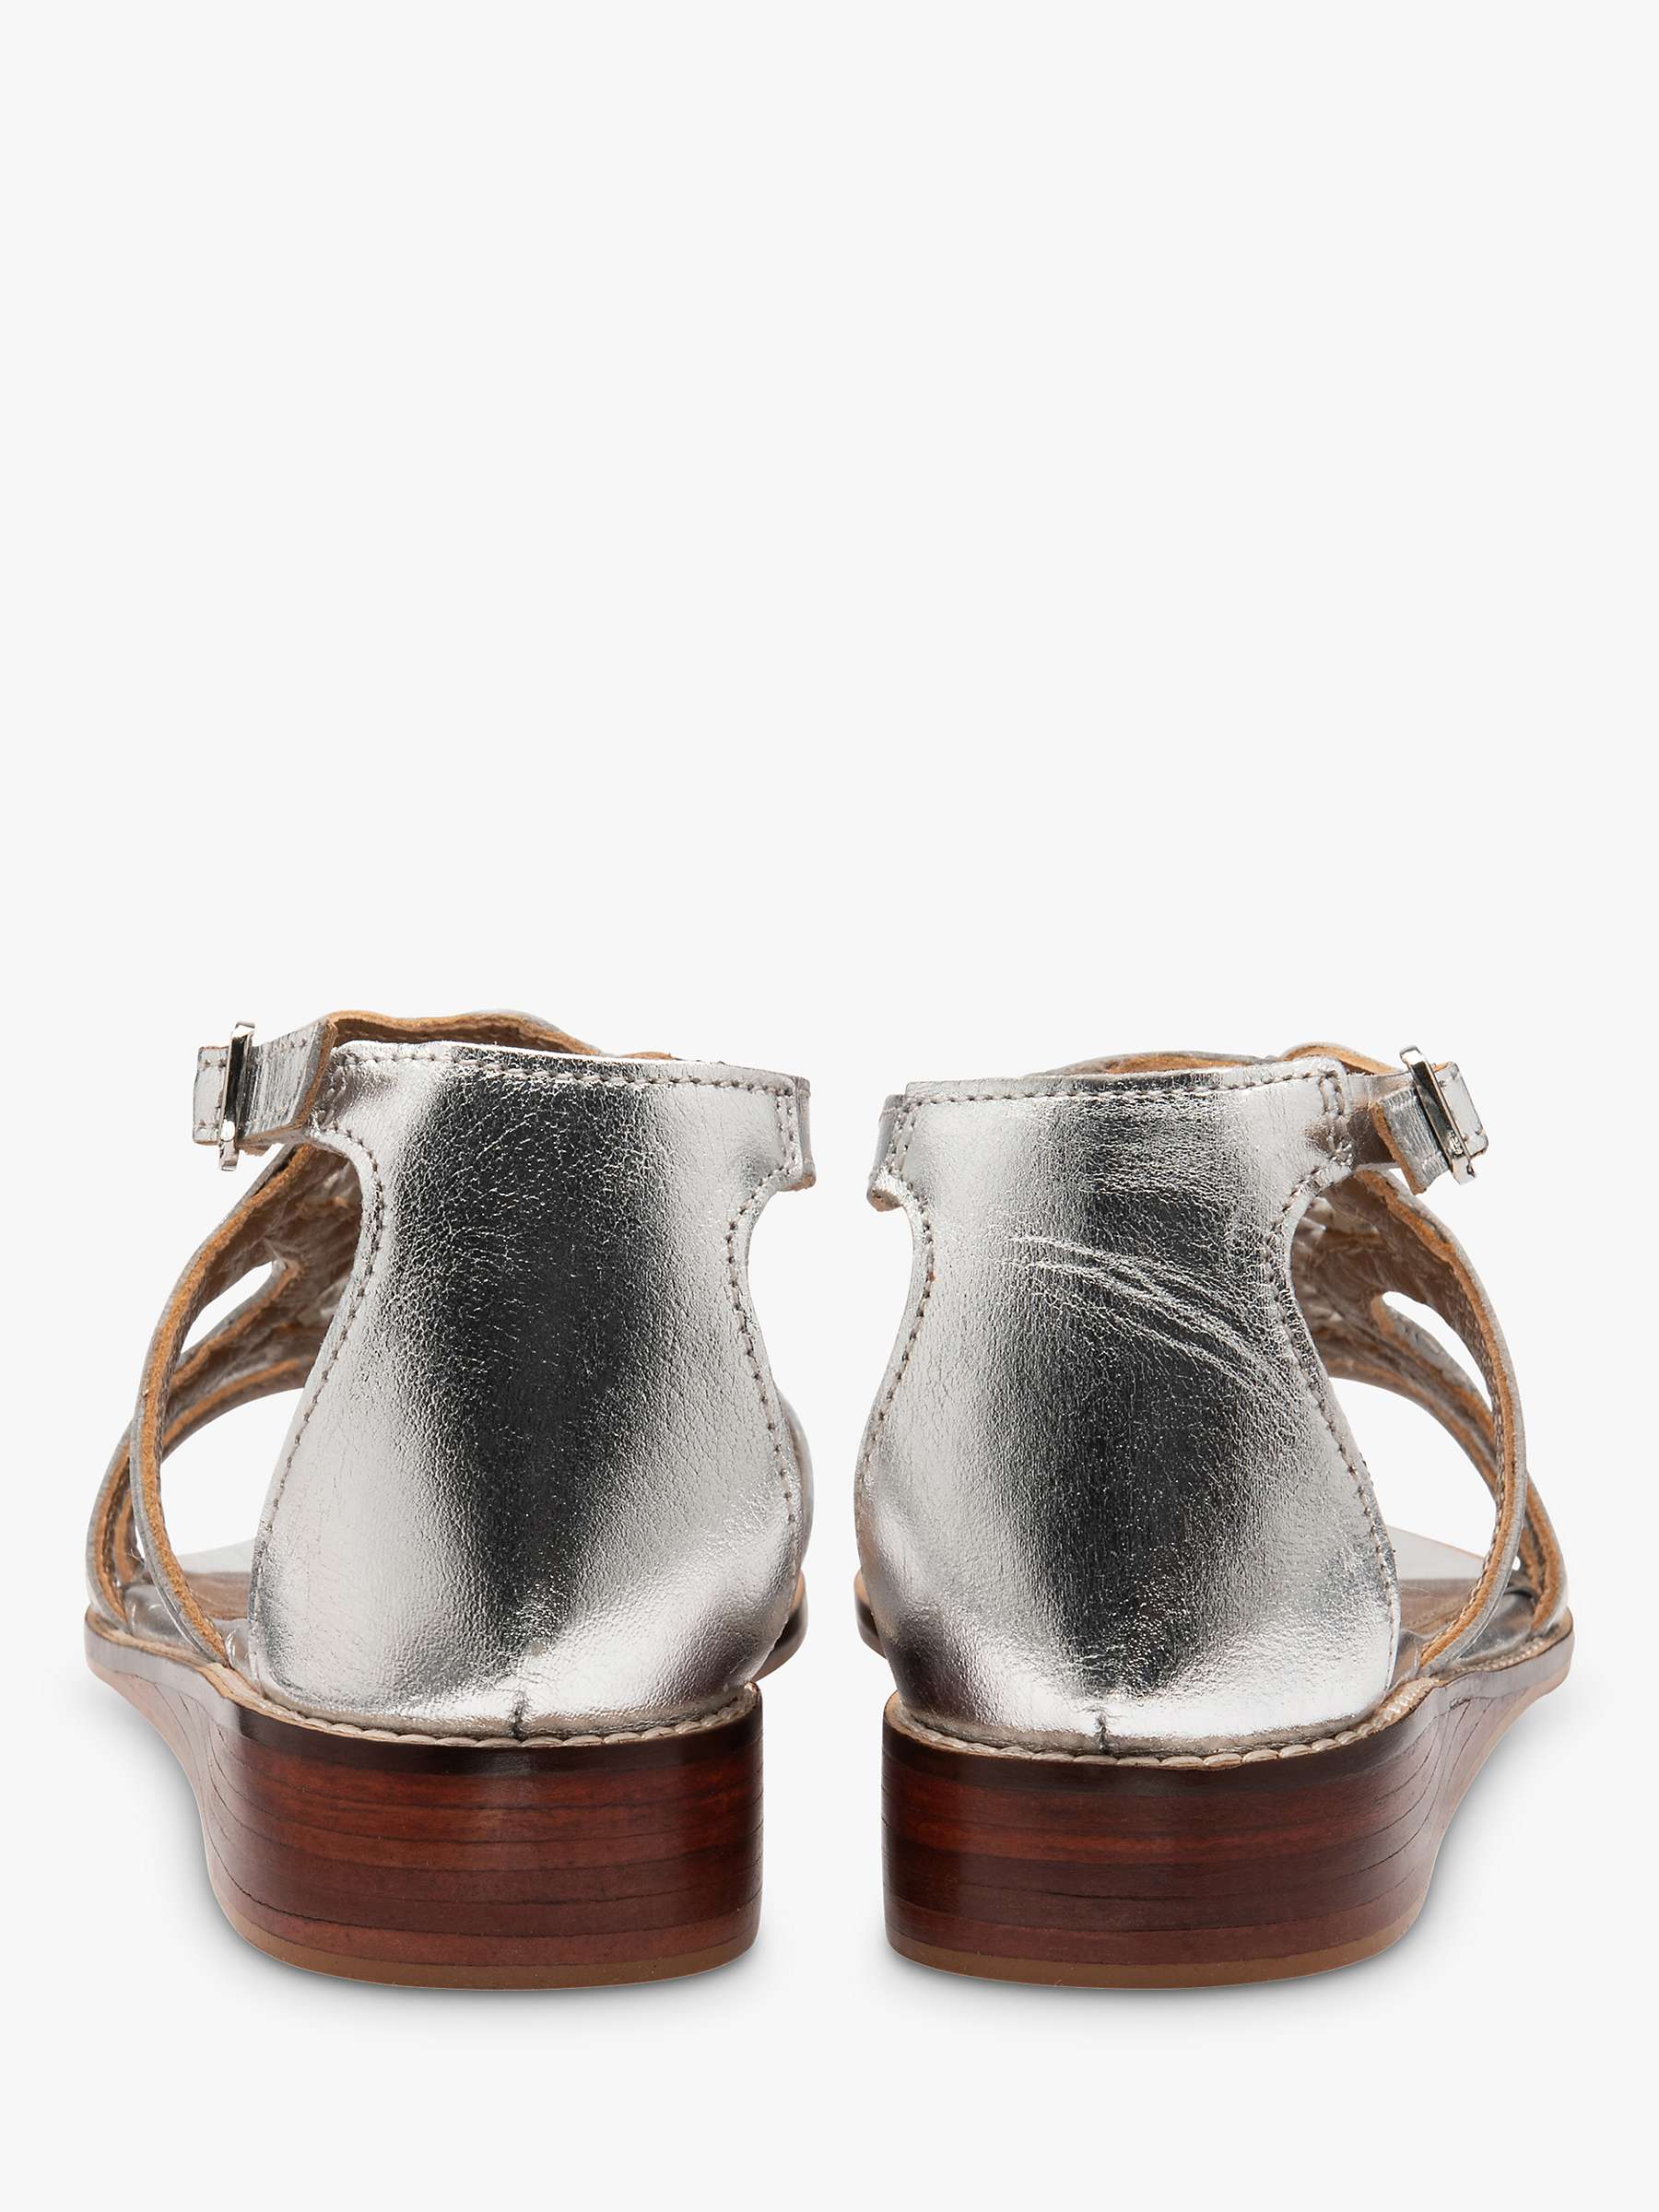 Buy Ravel Cardwell Leather Sandals Online at johnlewis.com